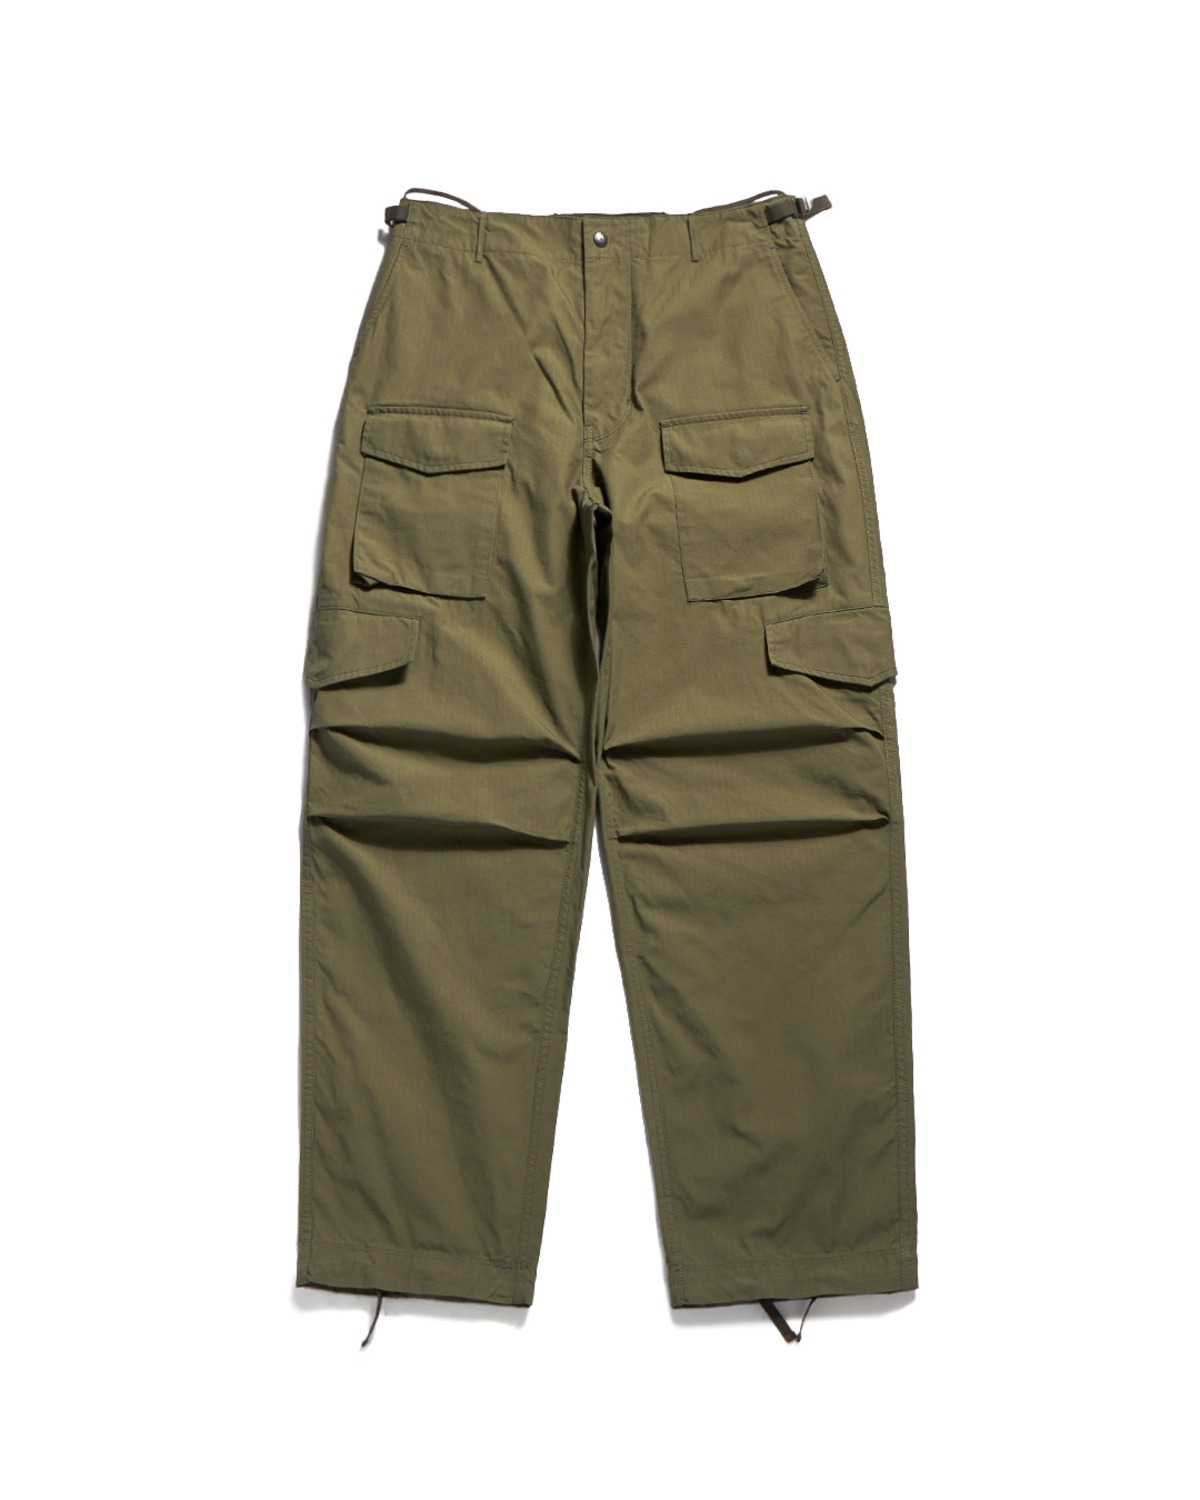 M-65 PANTS / OLIVE RIPSTOP